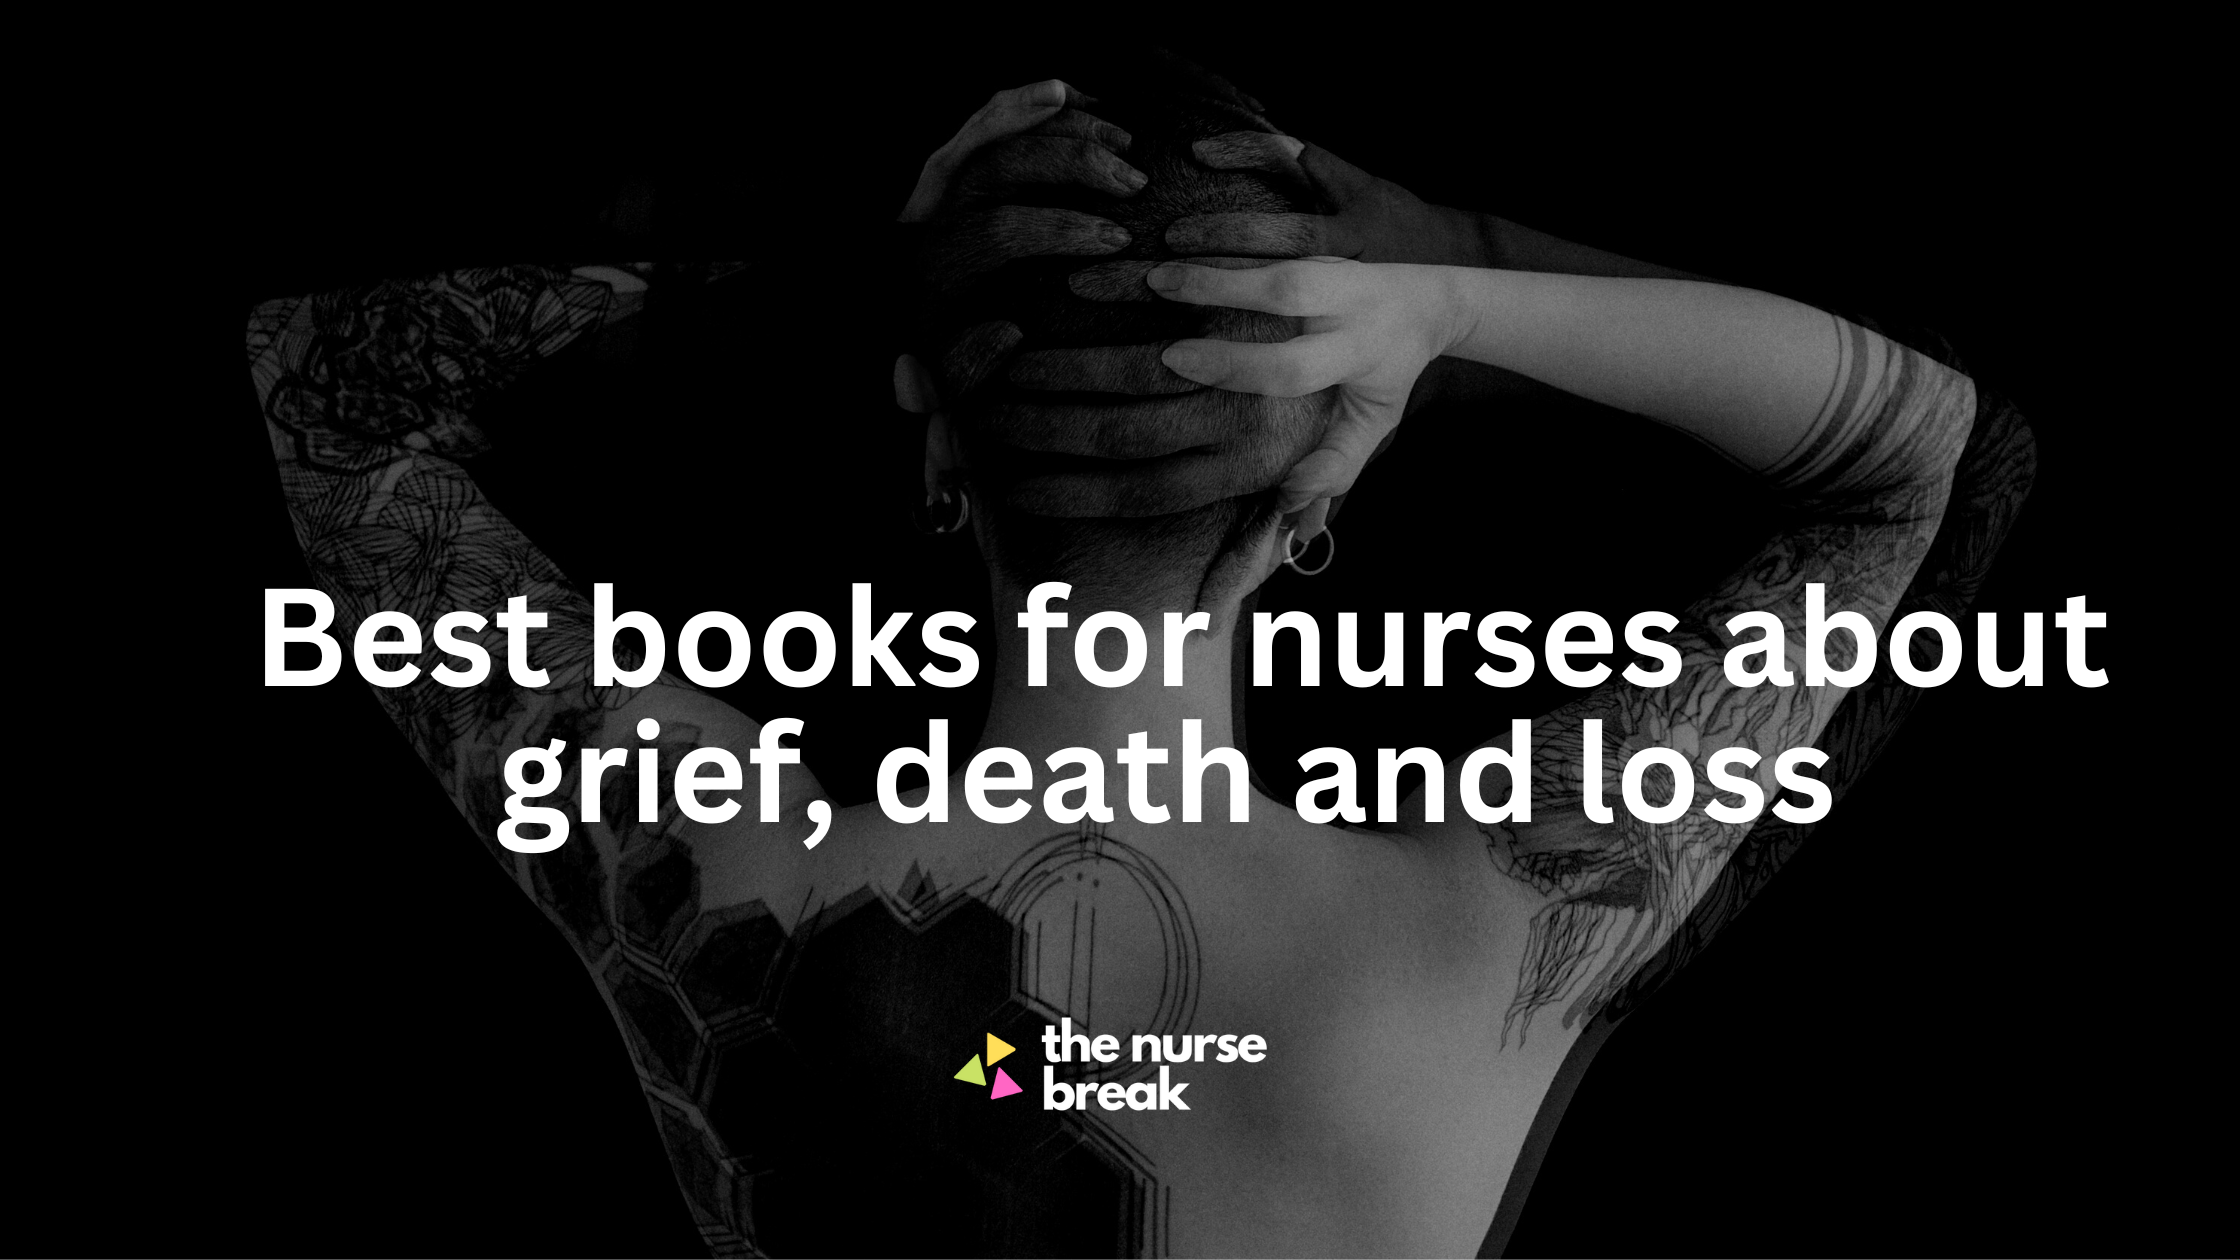 18 best books for nurses about grief, death and loss